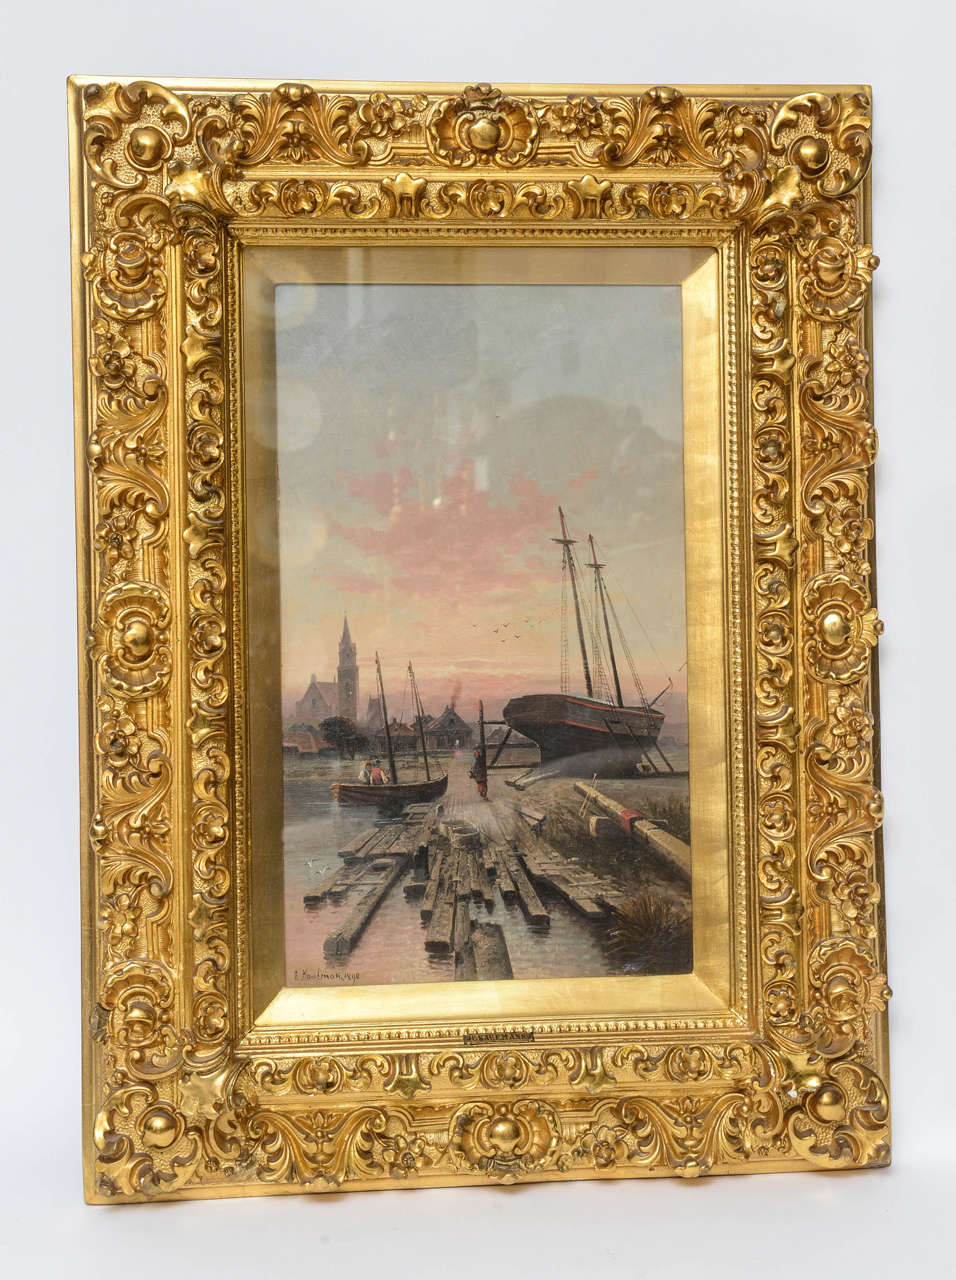 Canvas is under glass and very well preserved. It may have come from an area where coal was mined and was glassed to protect the canvas. The subject is a waterfront location, not sure where, but is extremely well executed and what appears to be in